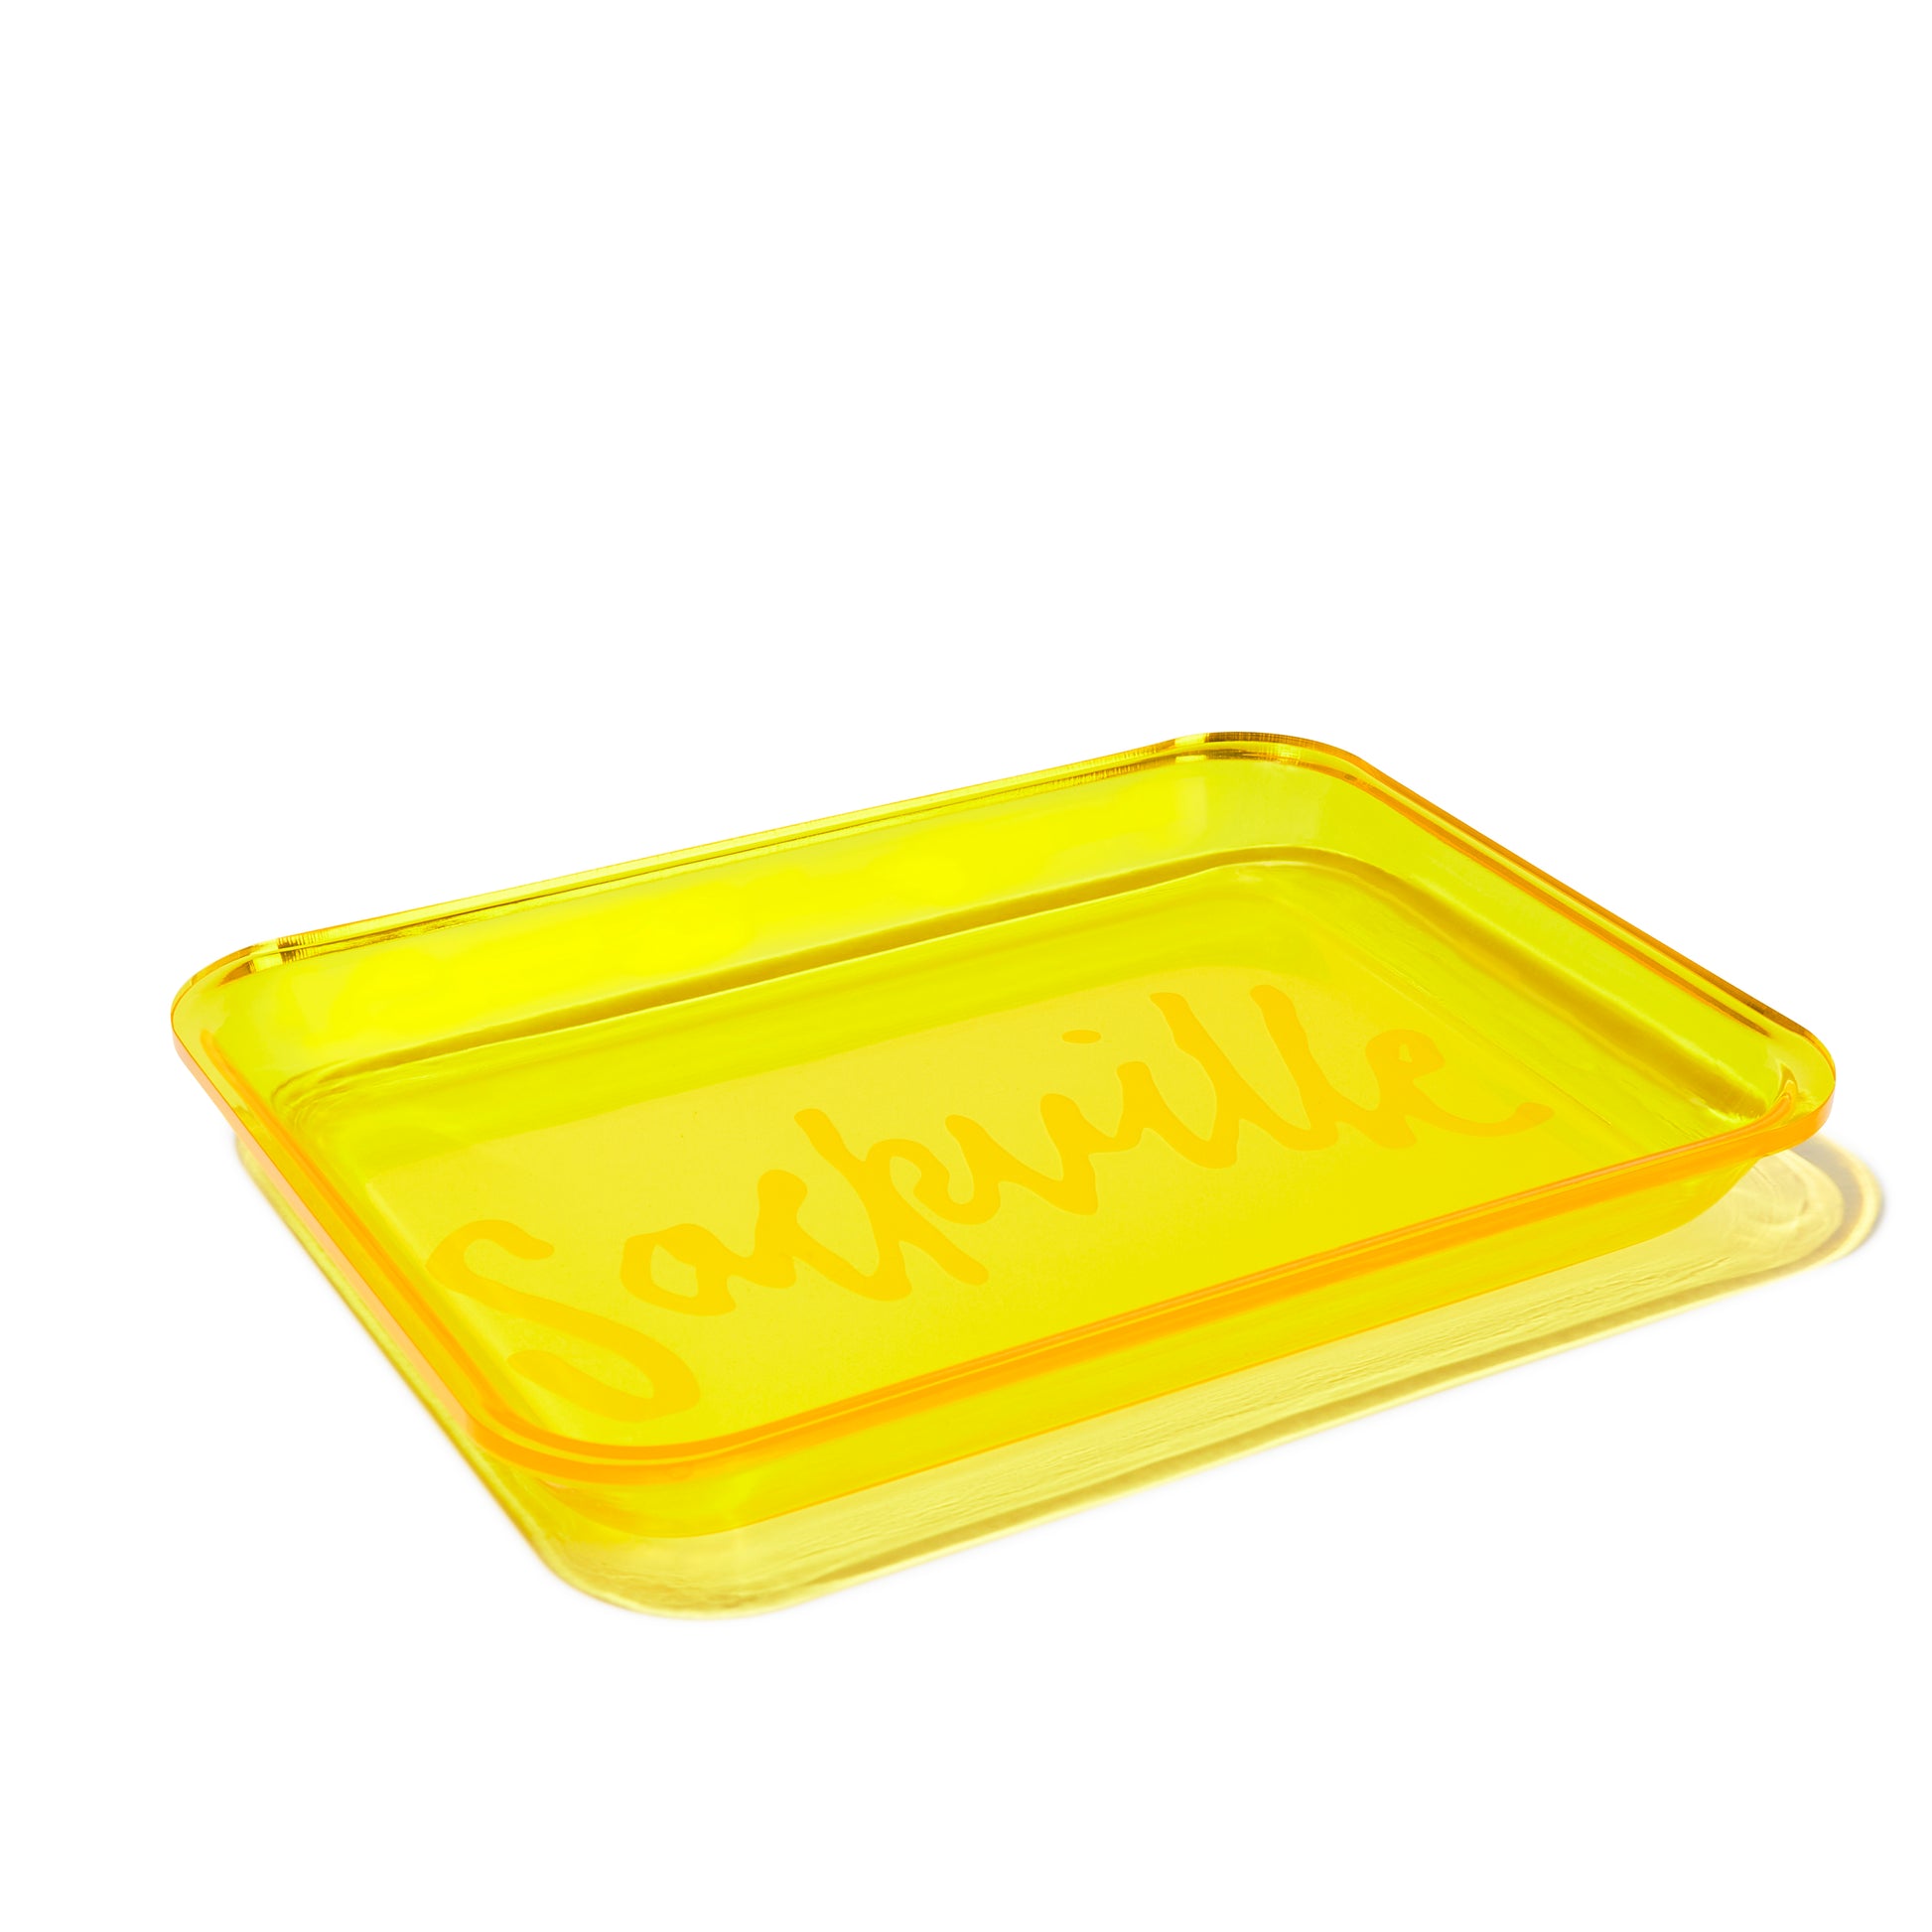 YELLOW GELLY ROLLING TRAY - Sackville & Co.